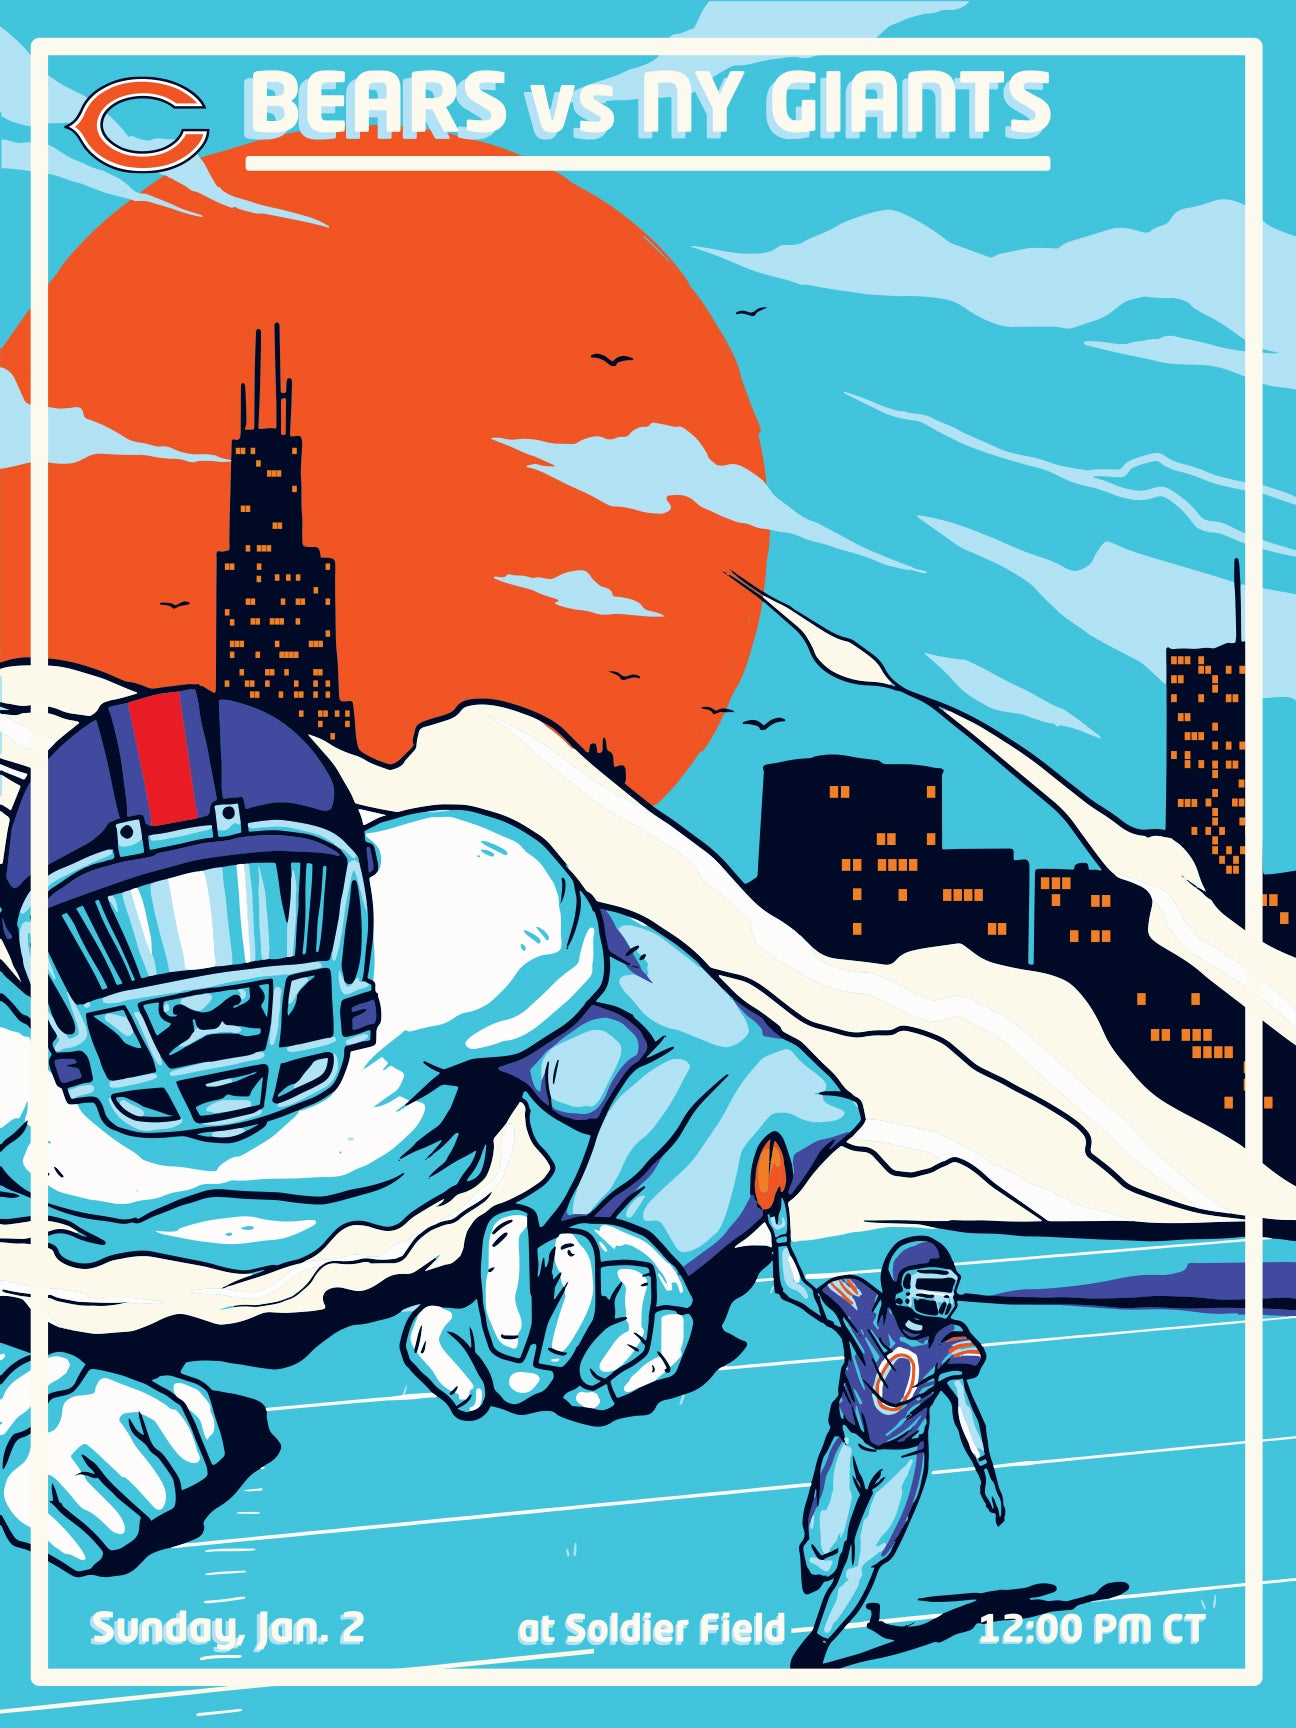 Game 16: 'Official Bears Vs. Giants' by Fedz